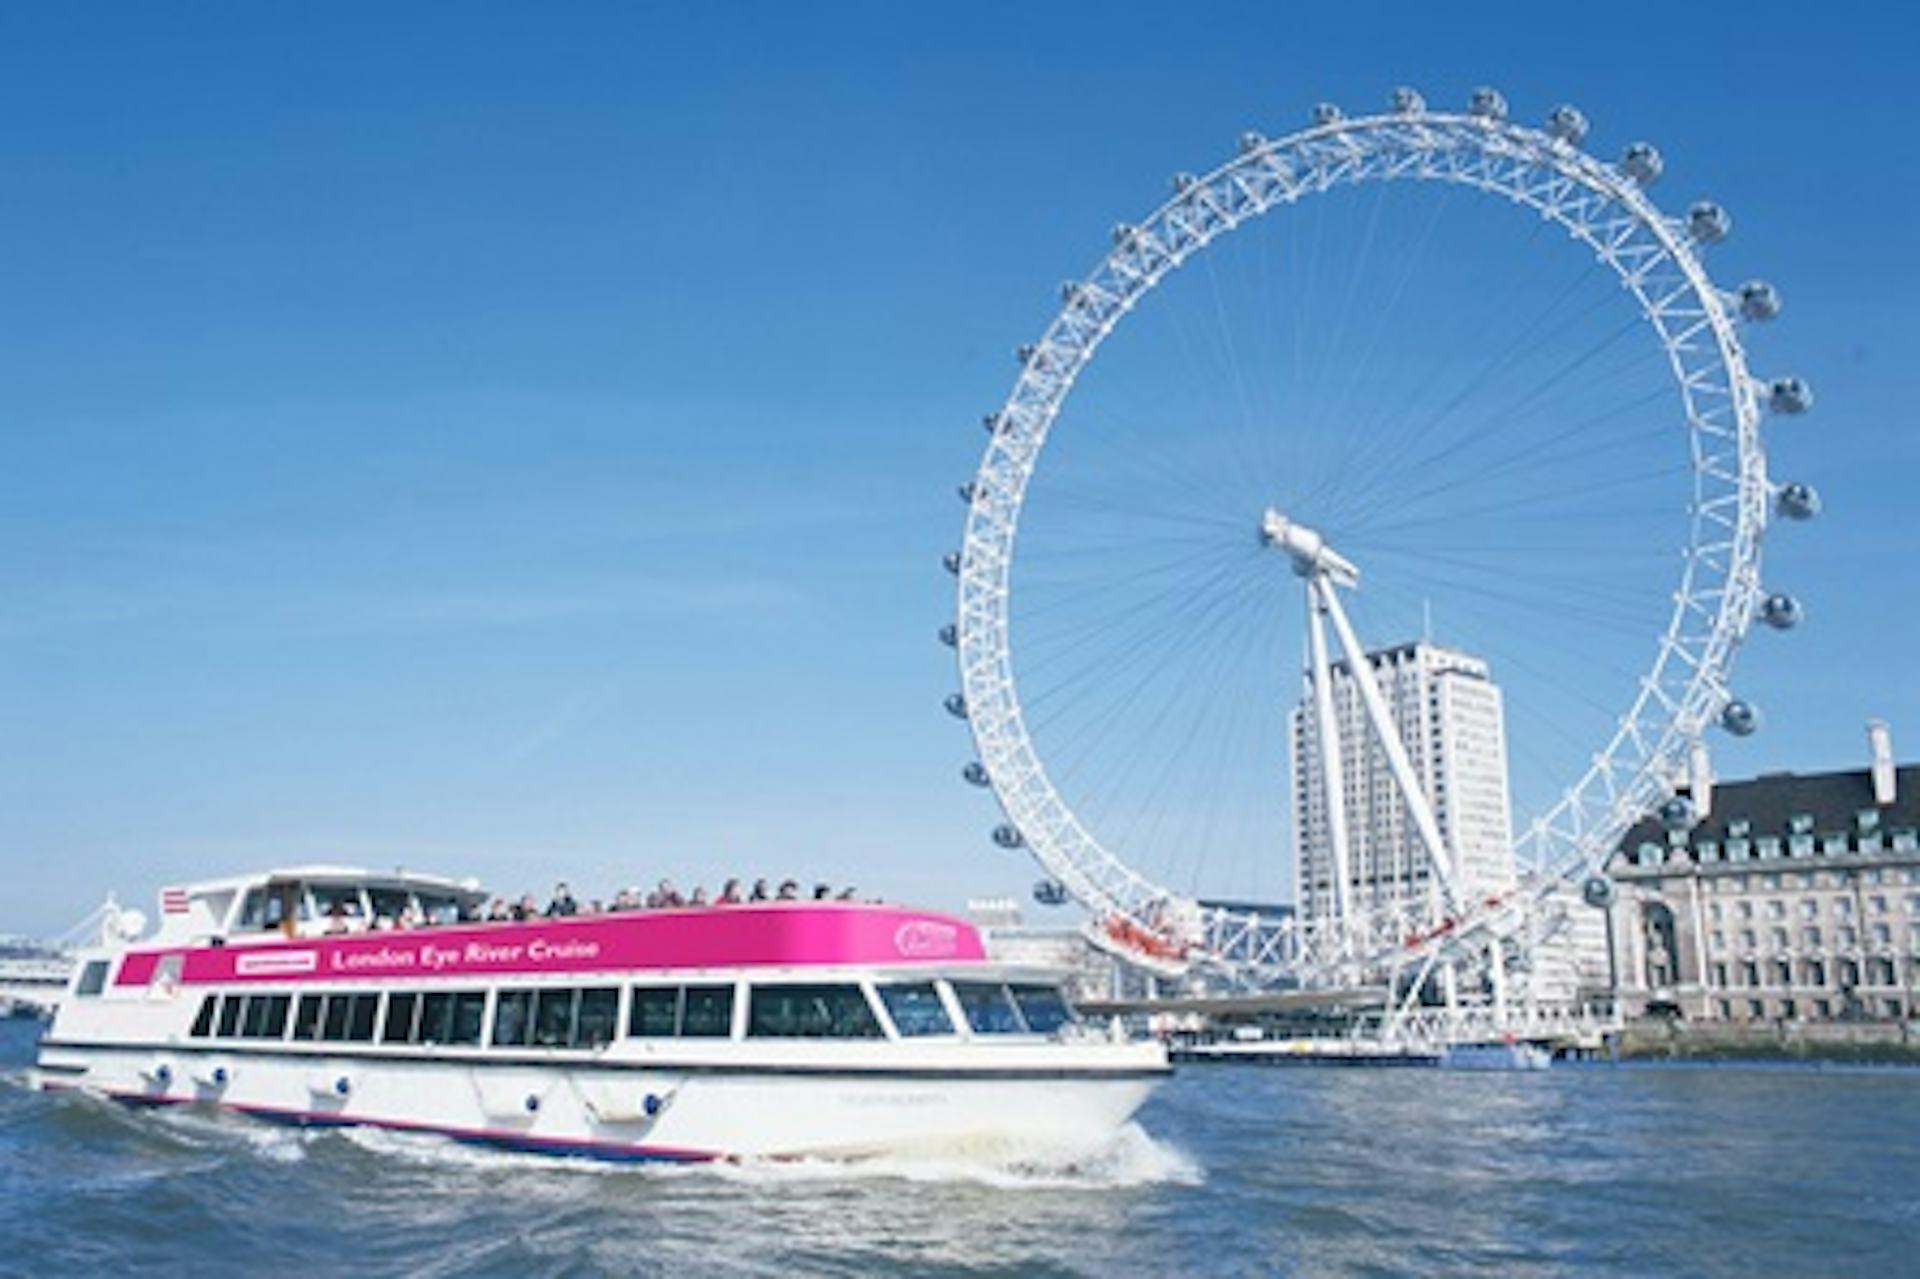 Visit to Lastminute.com London Eye with London Eye River Cruise - Two Adults and One Child